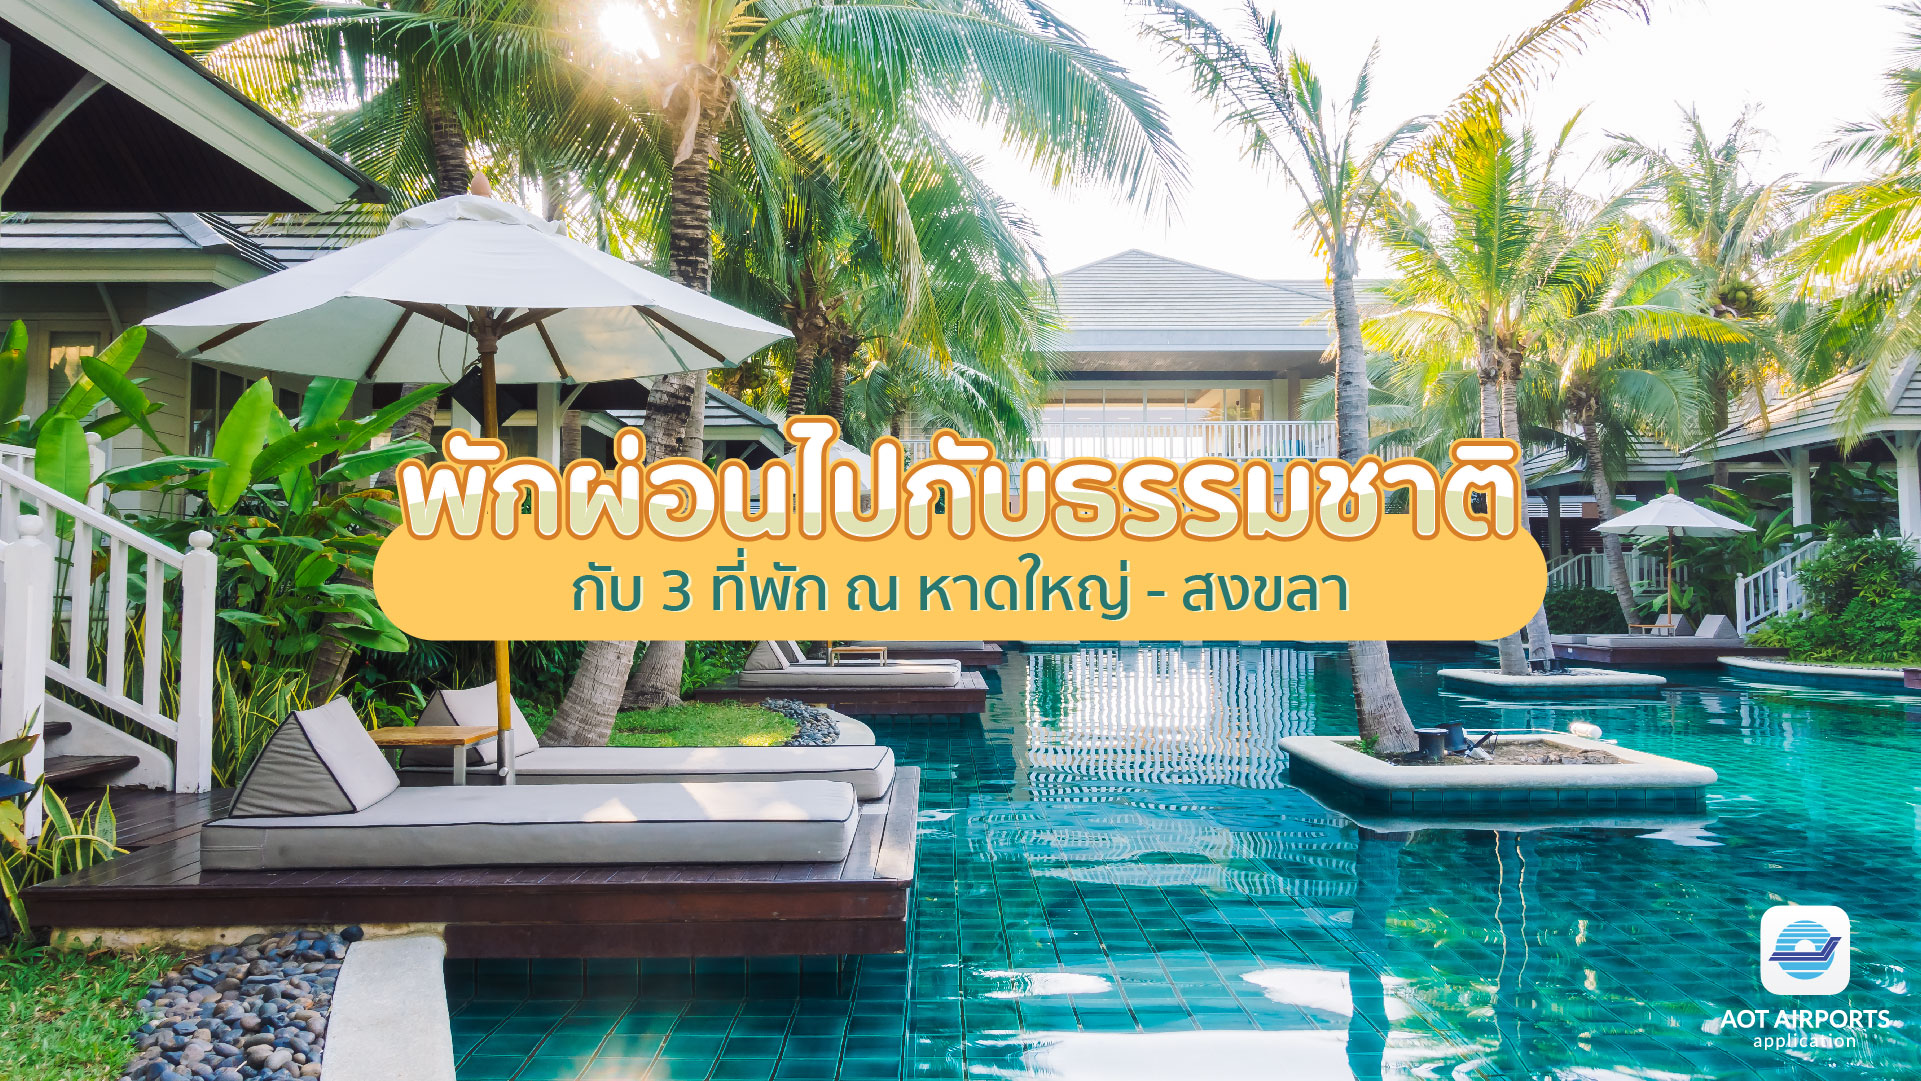 Relax in nature with 3 accommodations in Hat Yai-Songkhla